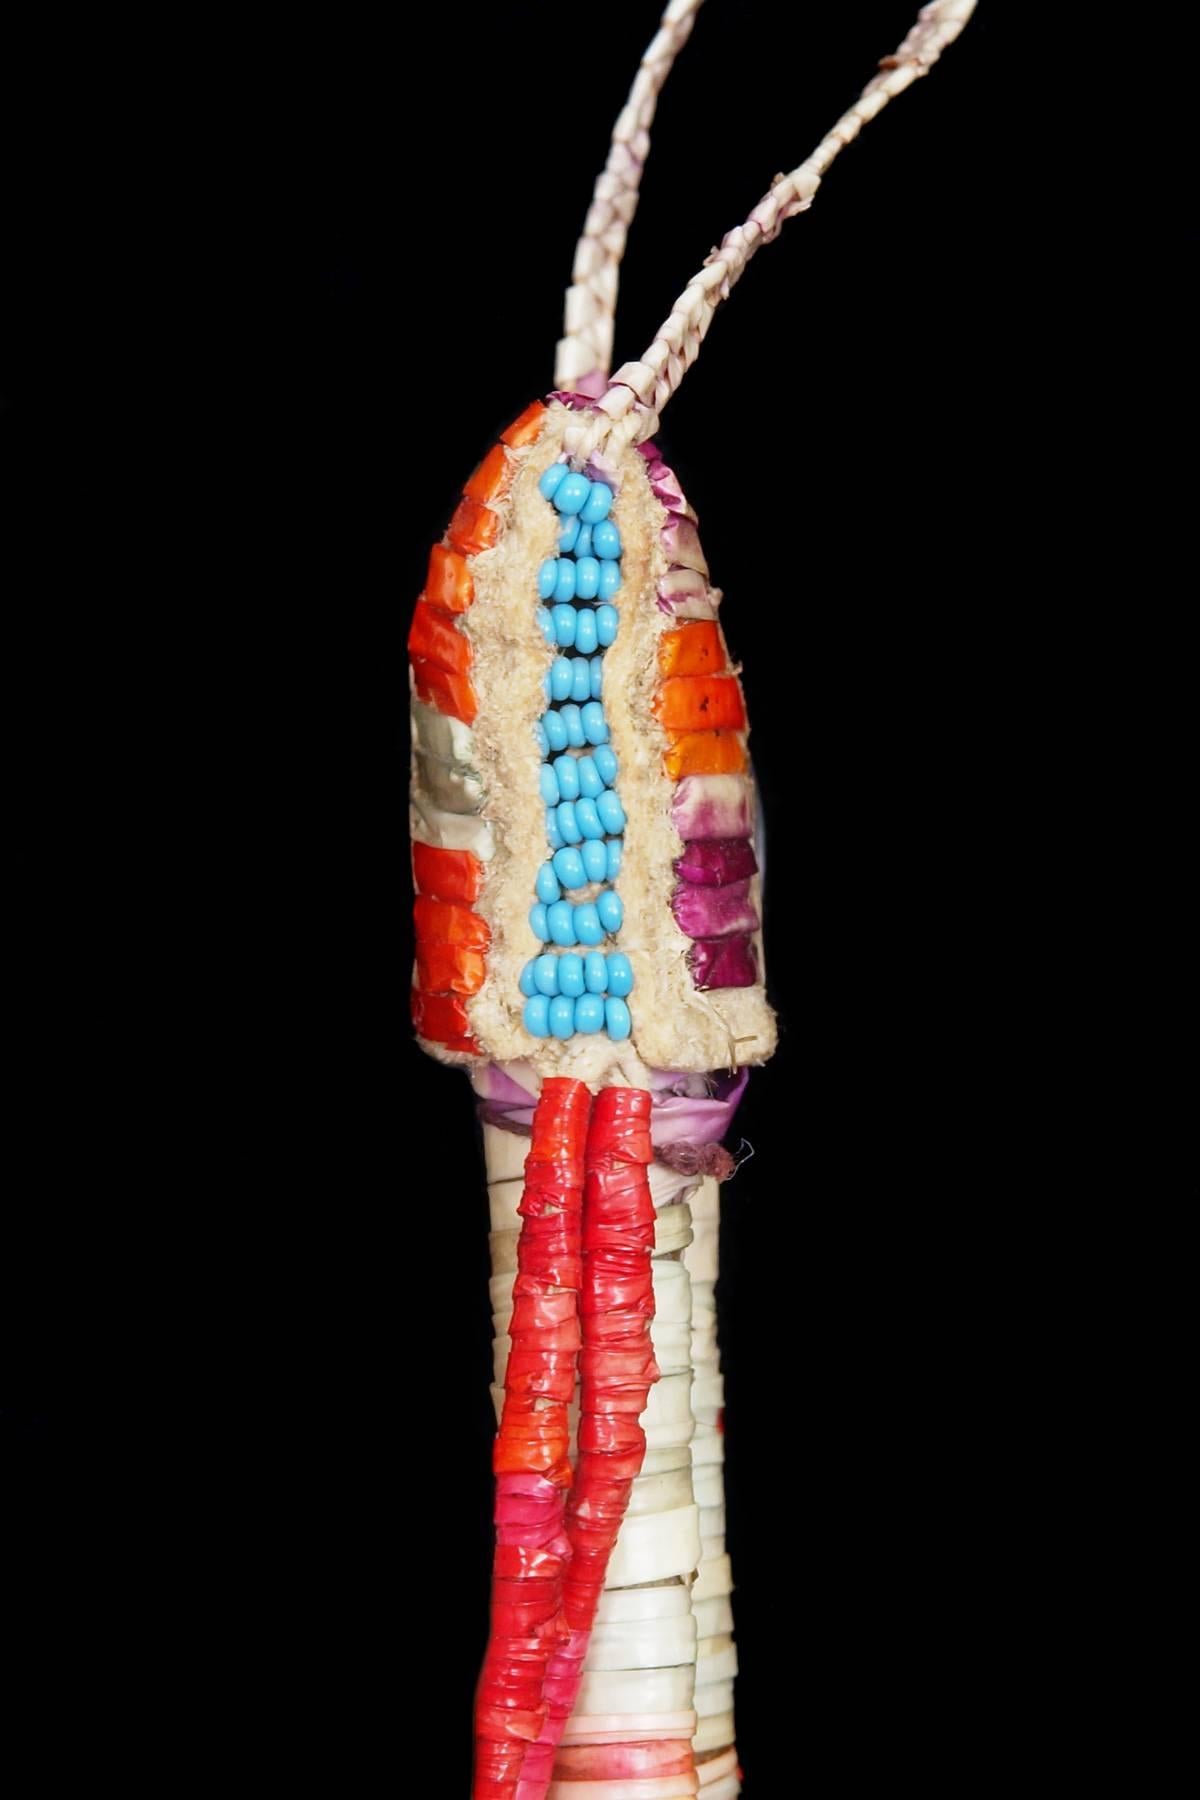 An exquisite antique Native American Awl Case created by a Sioux (Plains Indian), hide is intricately wrapped in quills that were dyed in multiple colors including red, orange, yellow, purple, blue and white, the suspensions are adorned with